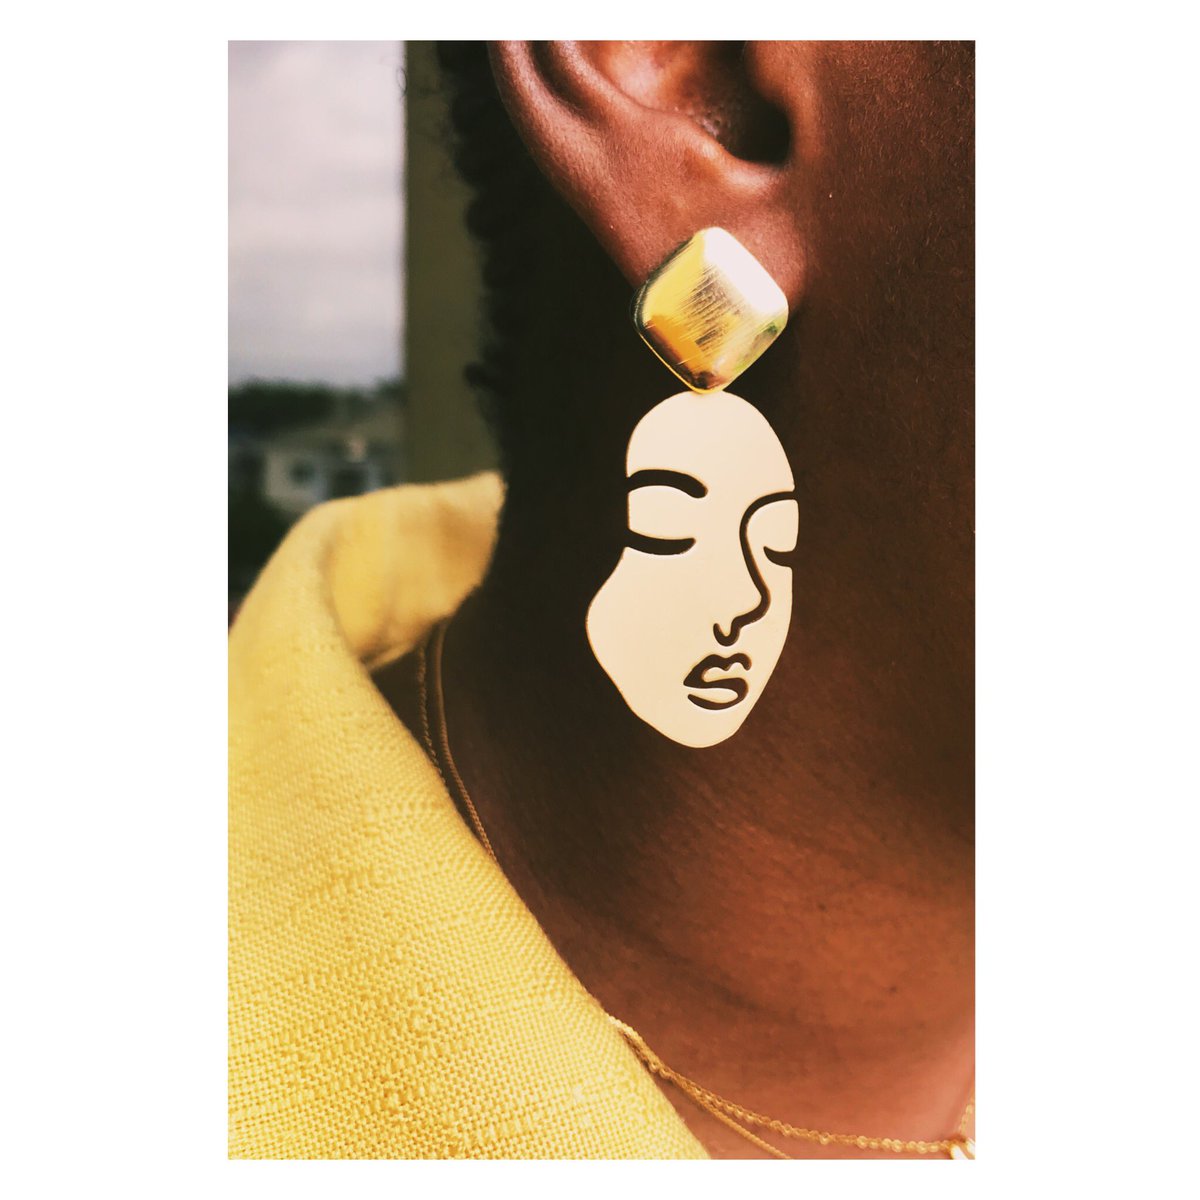 Different faces, different stories. What’s your story?

Abstract earrings: N2500

Place your order now via Dm or WhatsApp 09083959501.

#abstract #minimalistfashion #metalsbyolga #affordablefashion #accessories #earrings #olgadiva